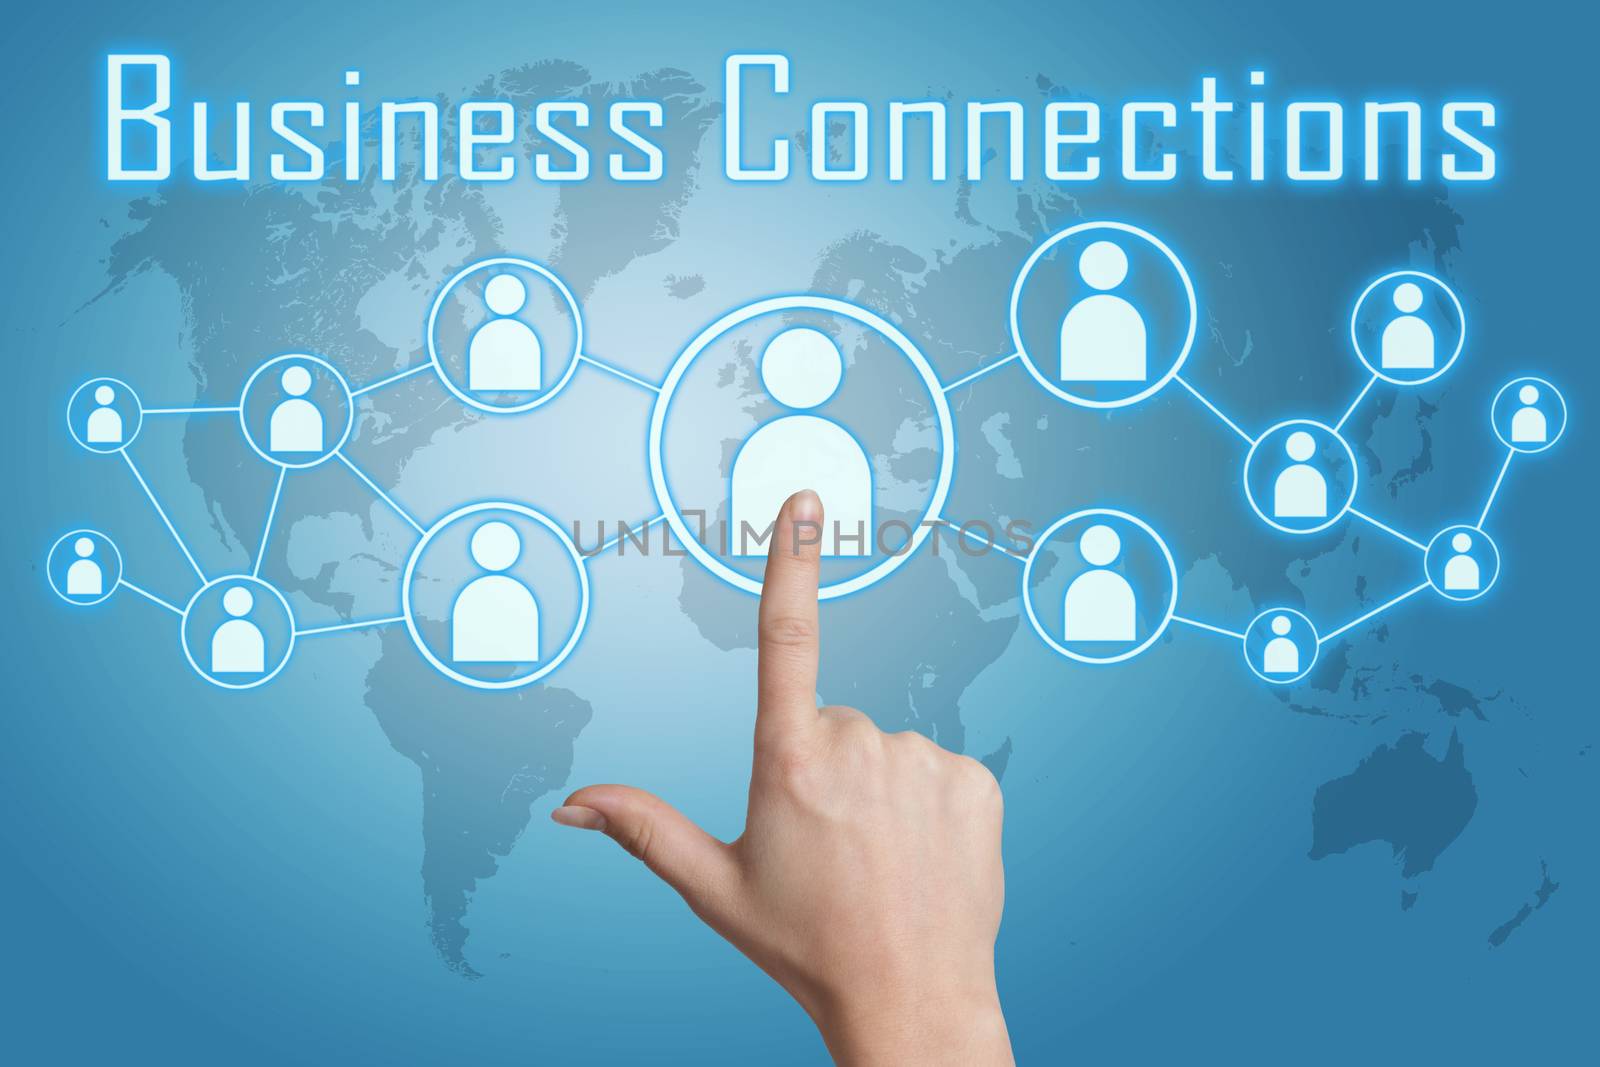 woman hand pressing business connections icon on blue background with world map